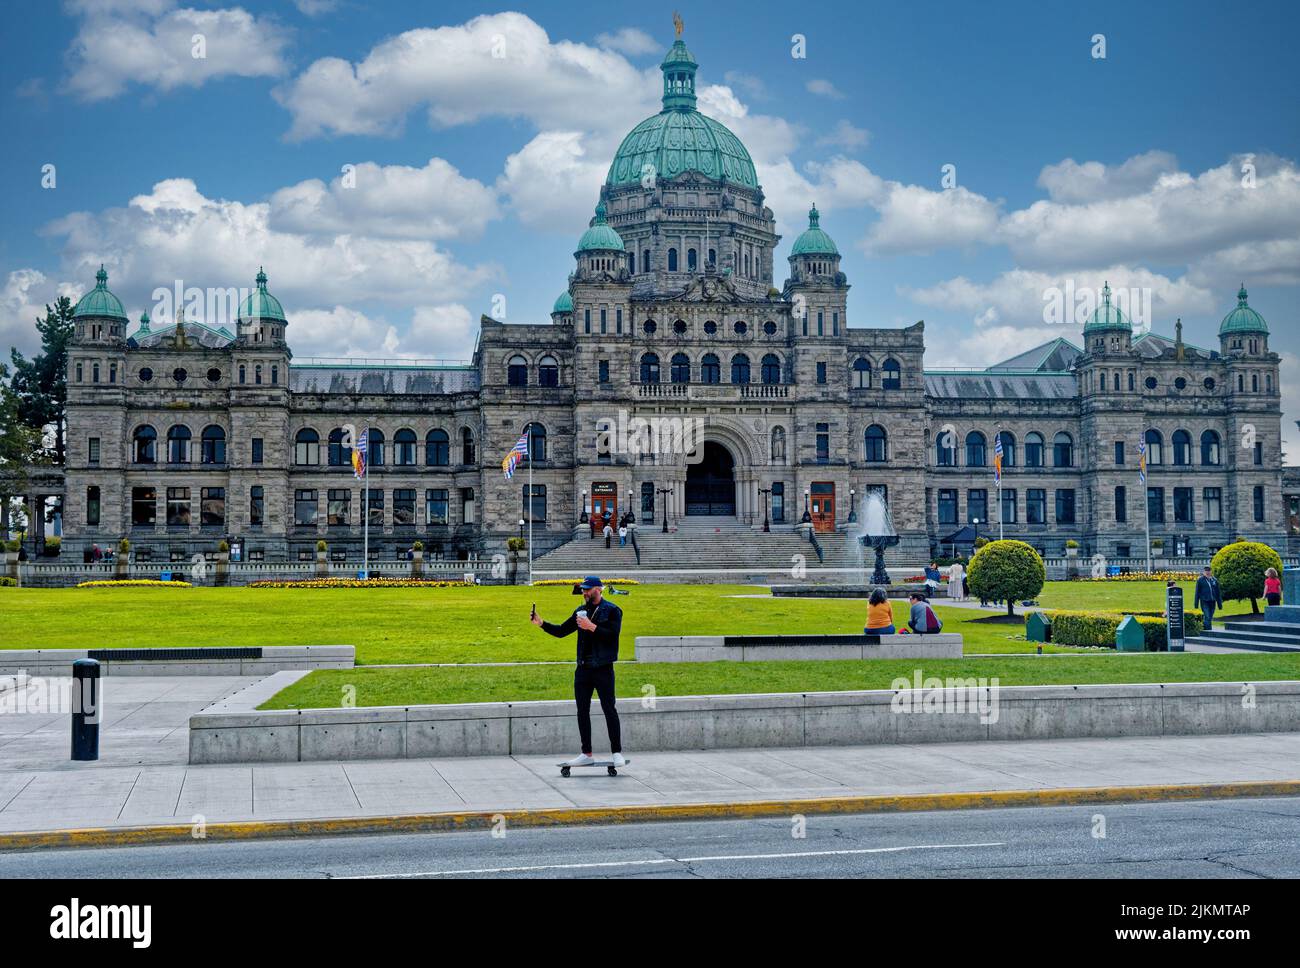 VICTORIA, BRITISH COLUMBIA - April 28, 2022: Victoria is the capital city of the Canadian province of British Columbia, located on the southern tip of Stock Photo